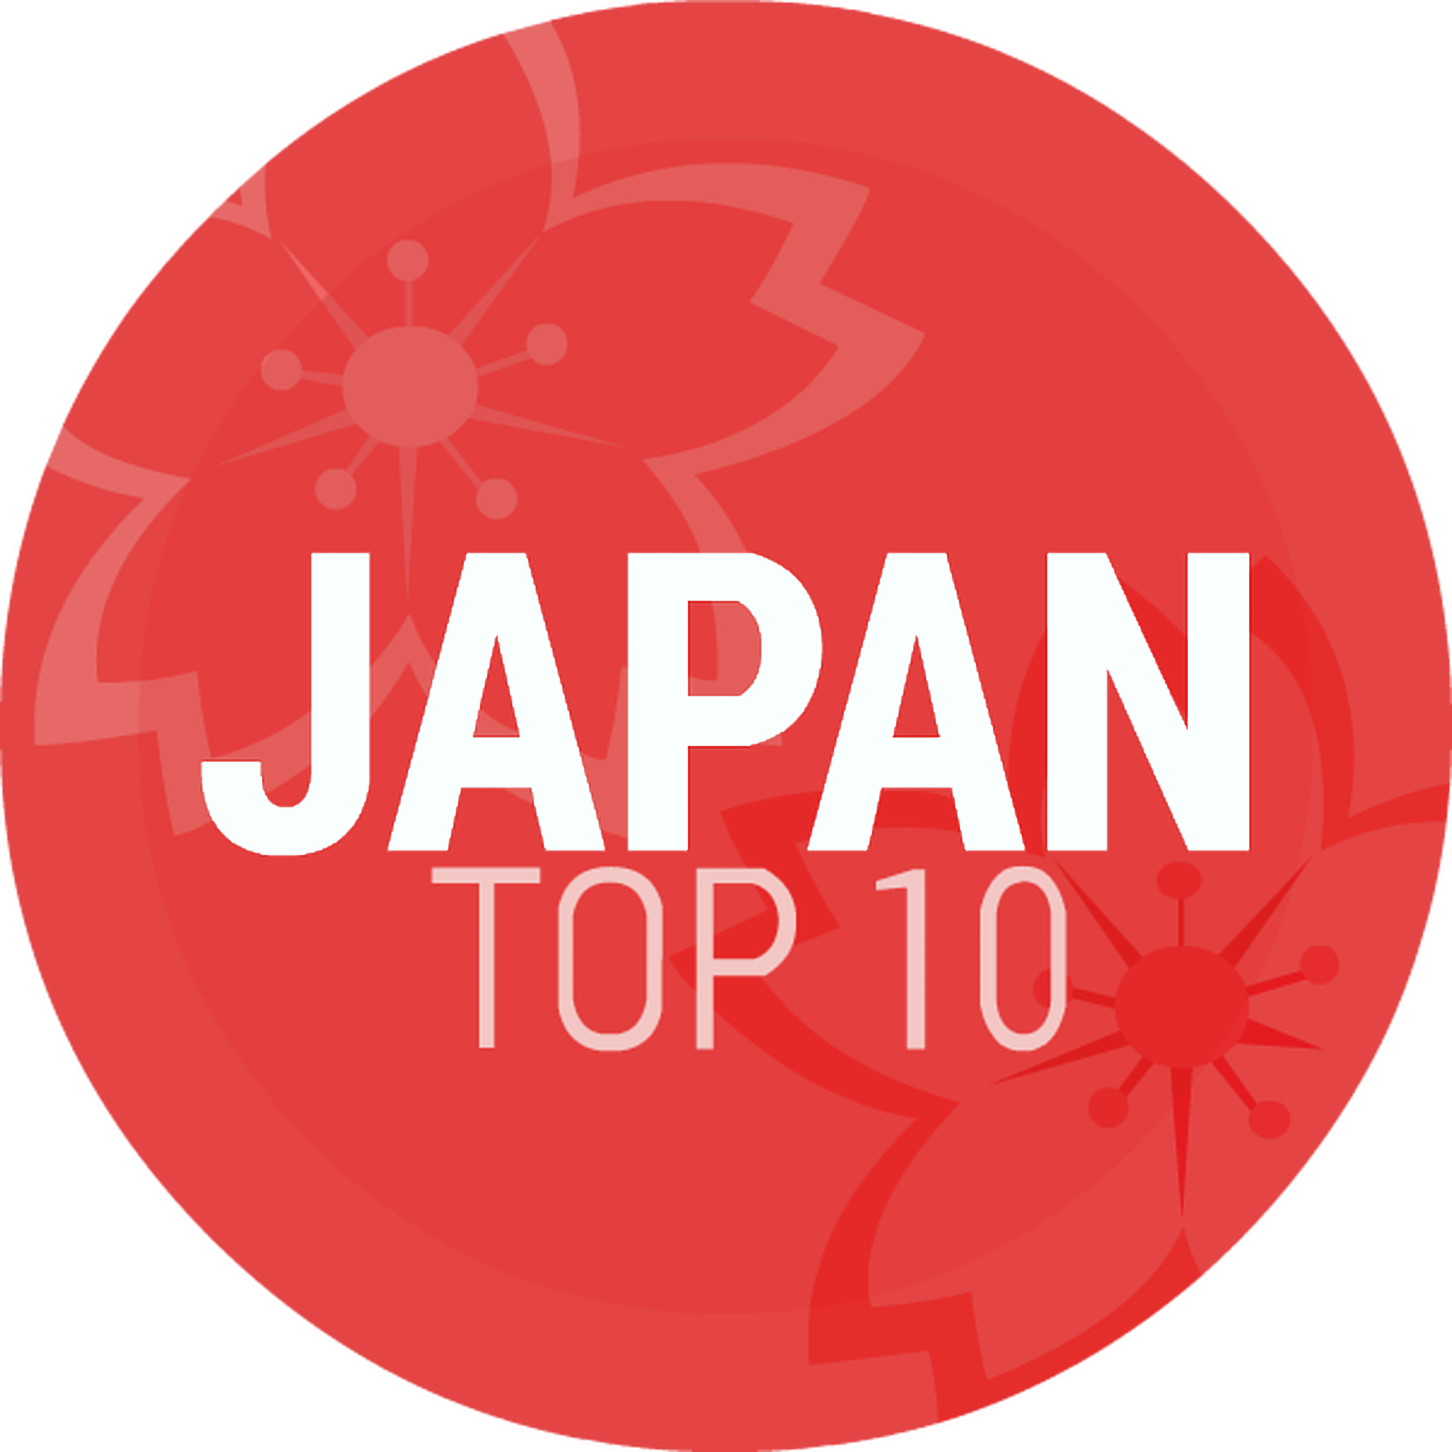 Episode 175: Japan Top 10 Early March 2017 Countdown